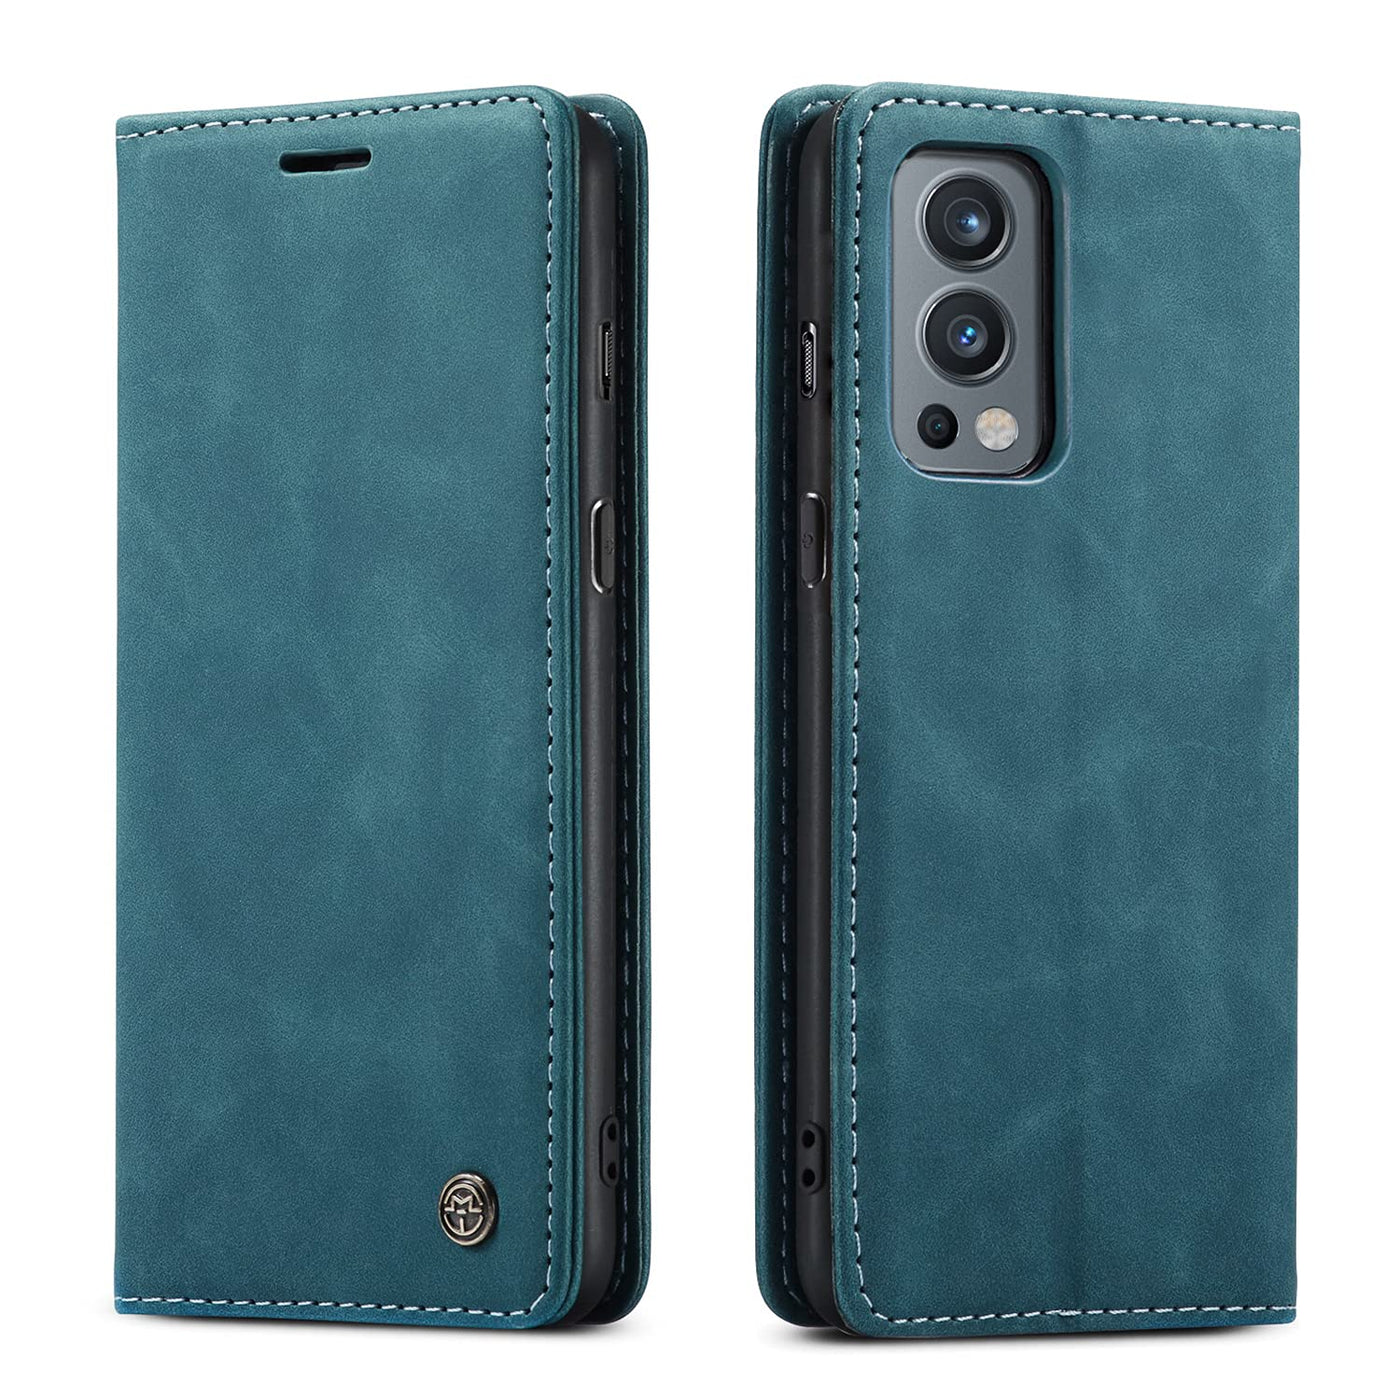 Oneplus Nord 2 blue color leather wallet flip cover case By excelsior